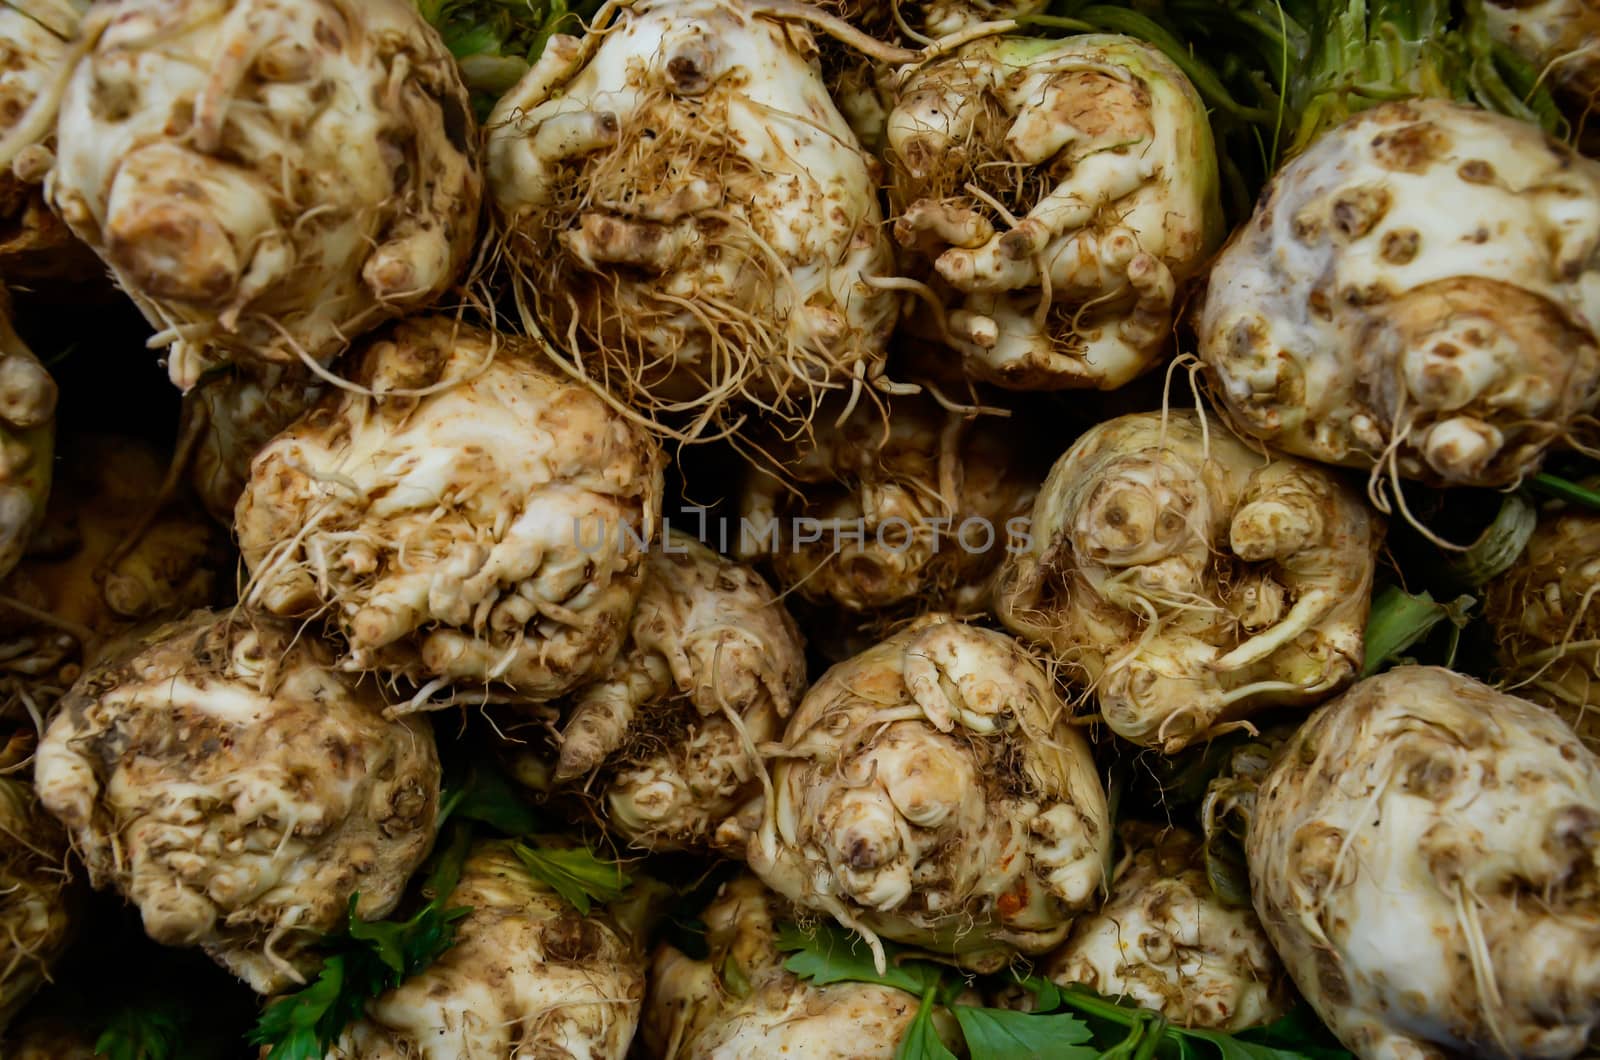 Group of celery roots